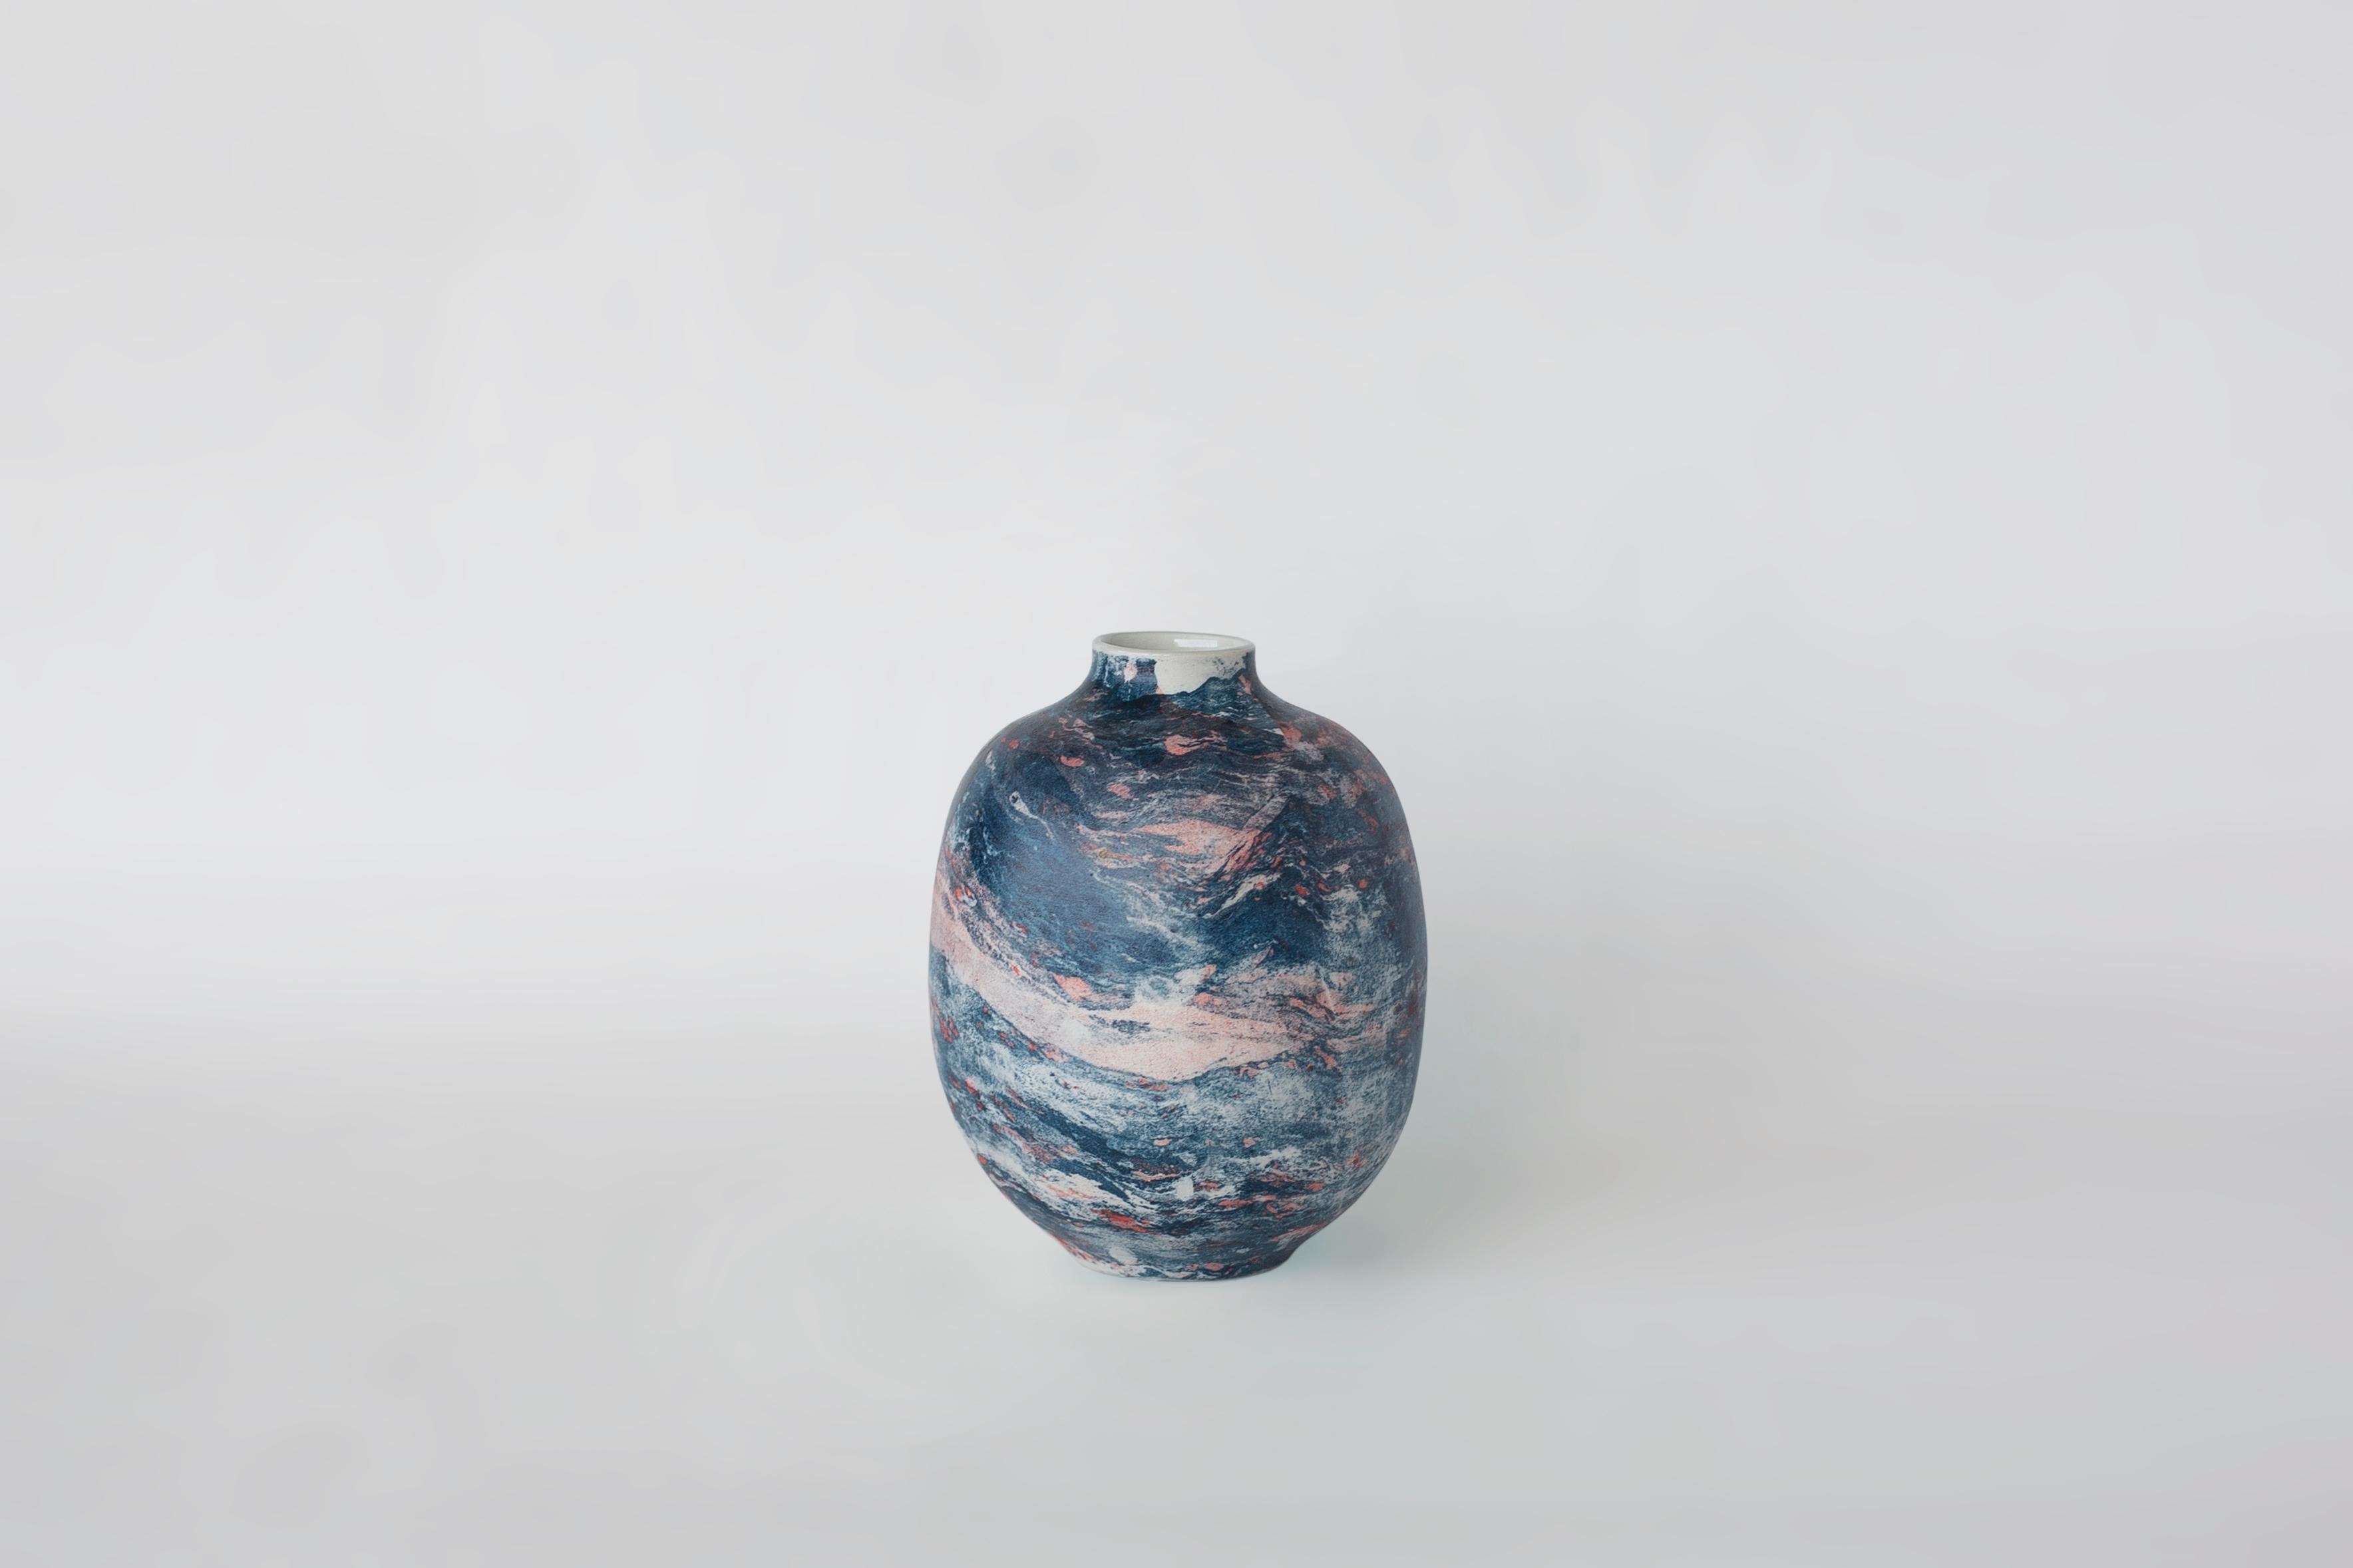 Small marble vase by Veronika Švábeníková
Dimensions: 14 × 14 × 17.5 cm
Materials: Ceramic

A petit version of a truly unique collection of ceramic vases that will enhance any decor.

The way she makes them is truly unique. She takes common